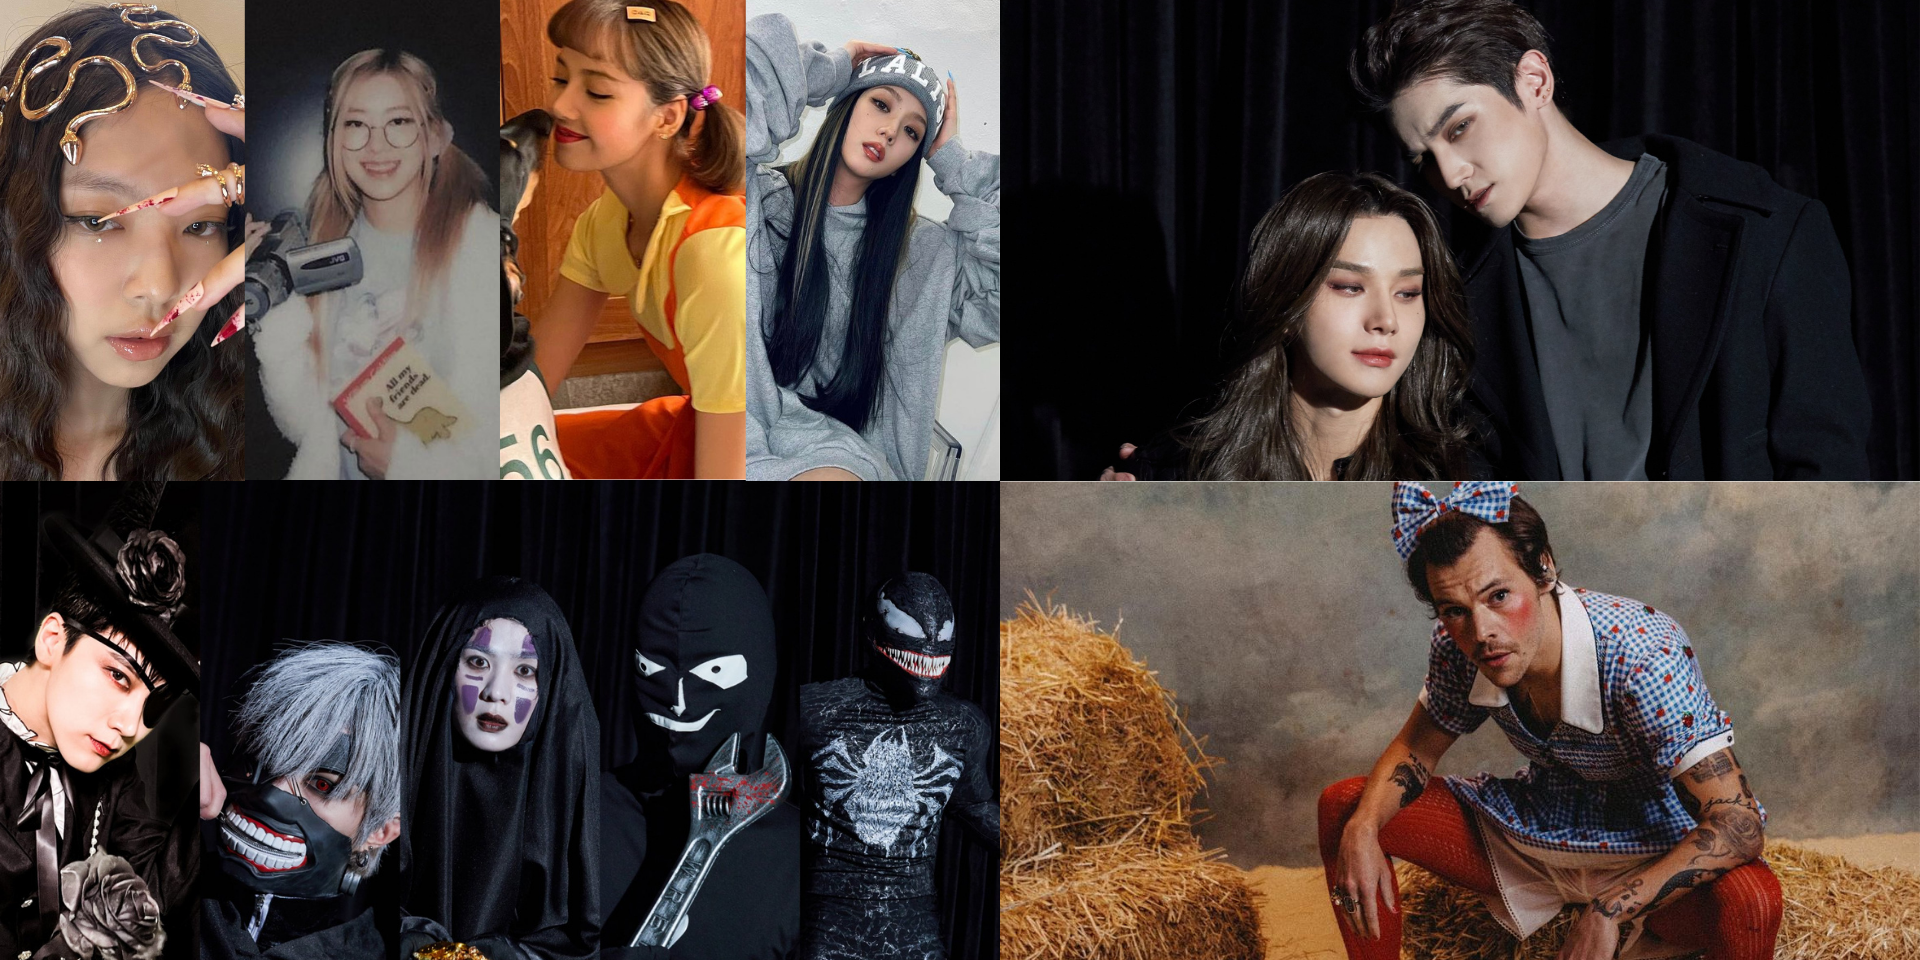 Here's what some musicians and artists wore this Halloween – Harry Styles, BLACKPINK, WayV, NCT, and more